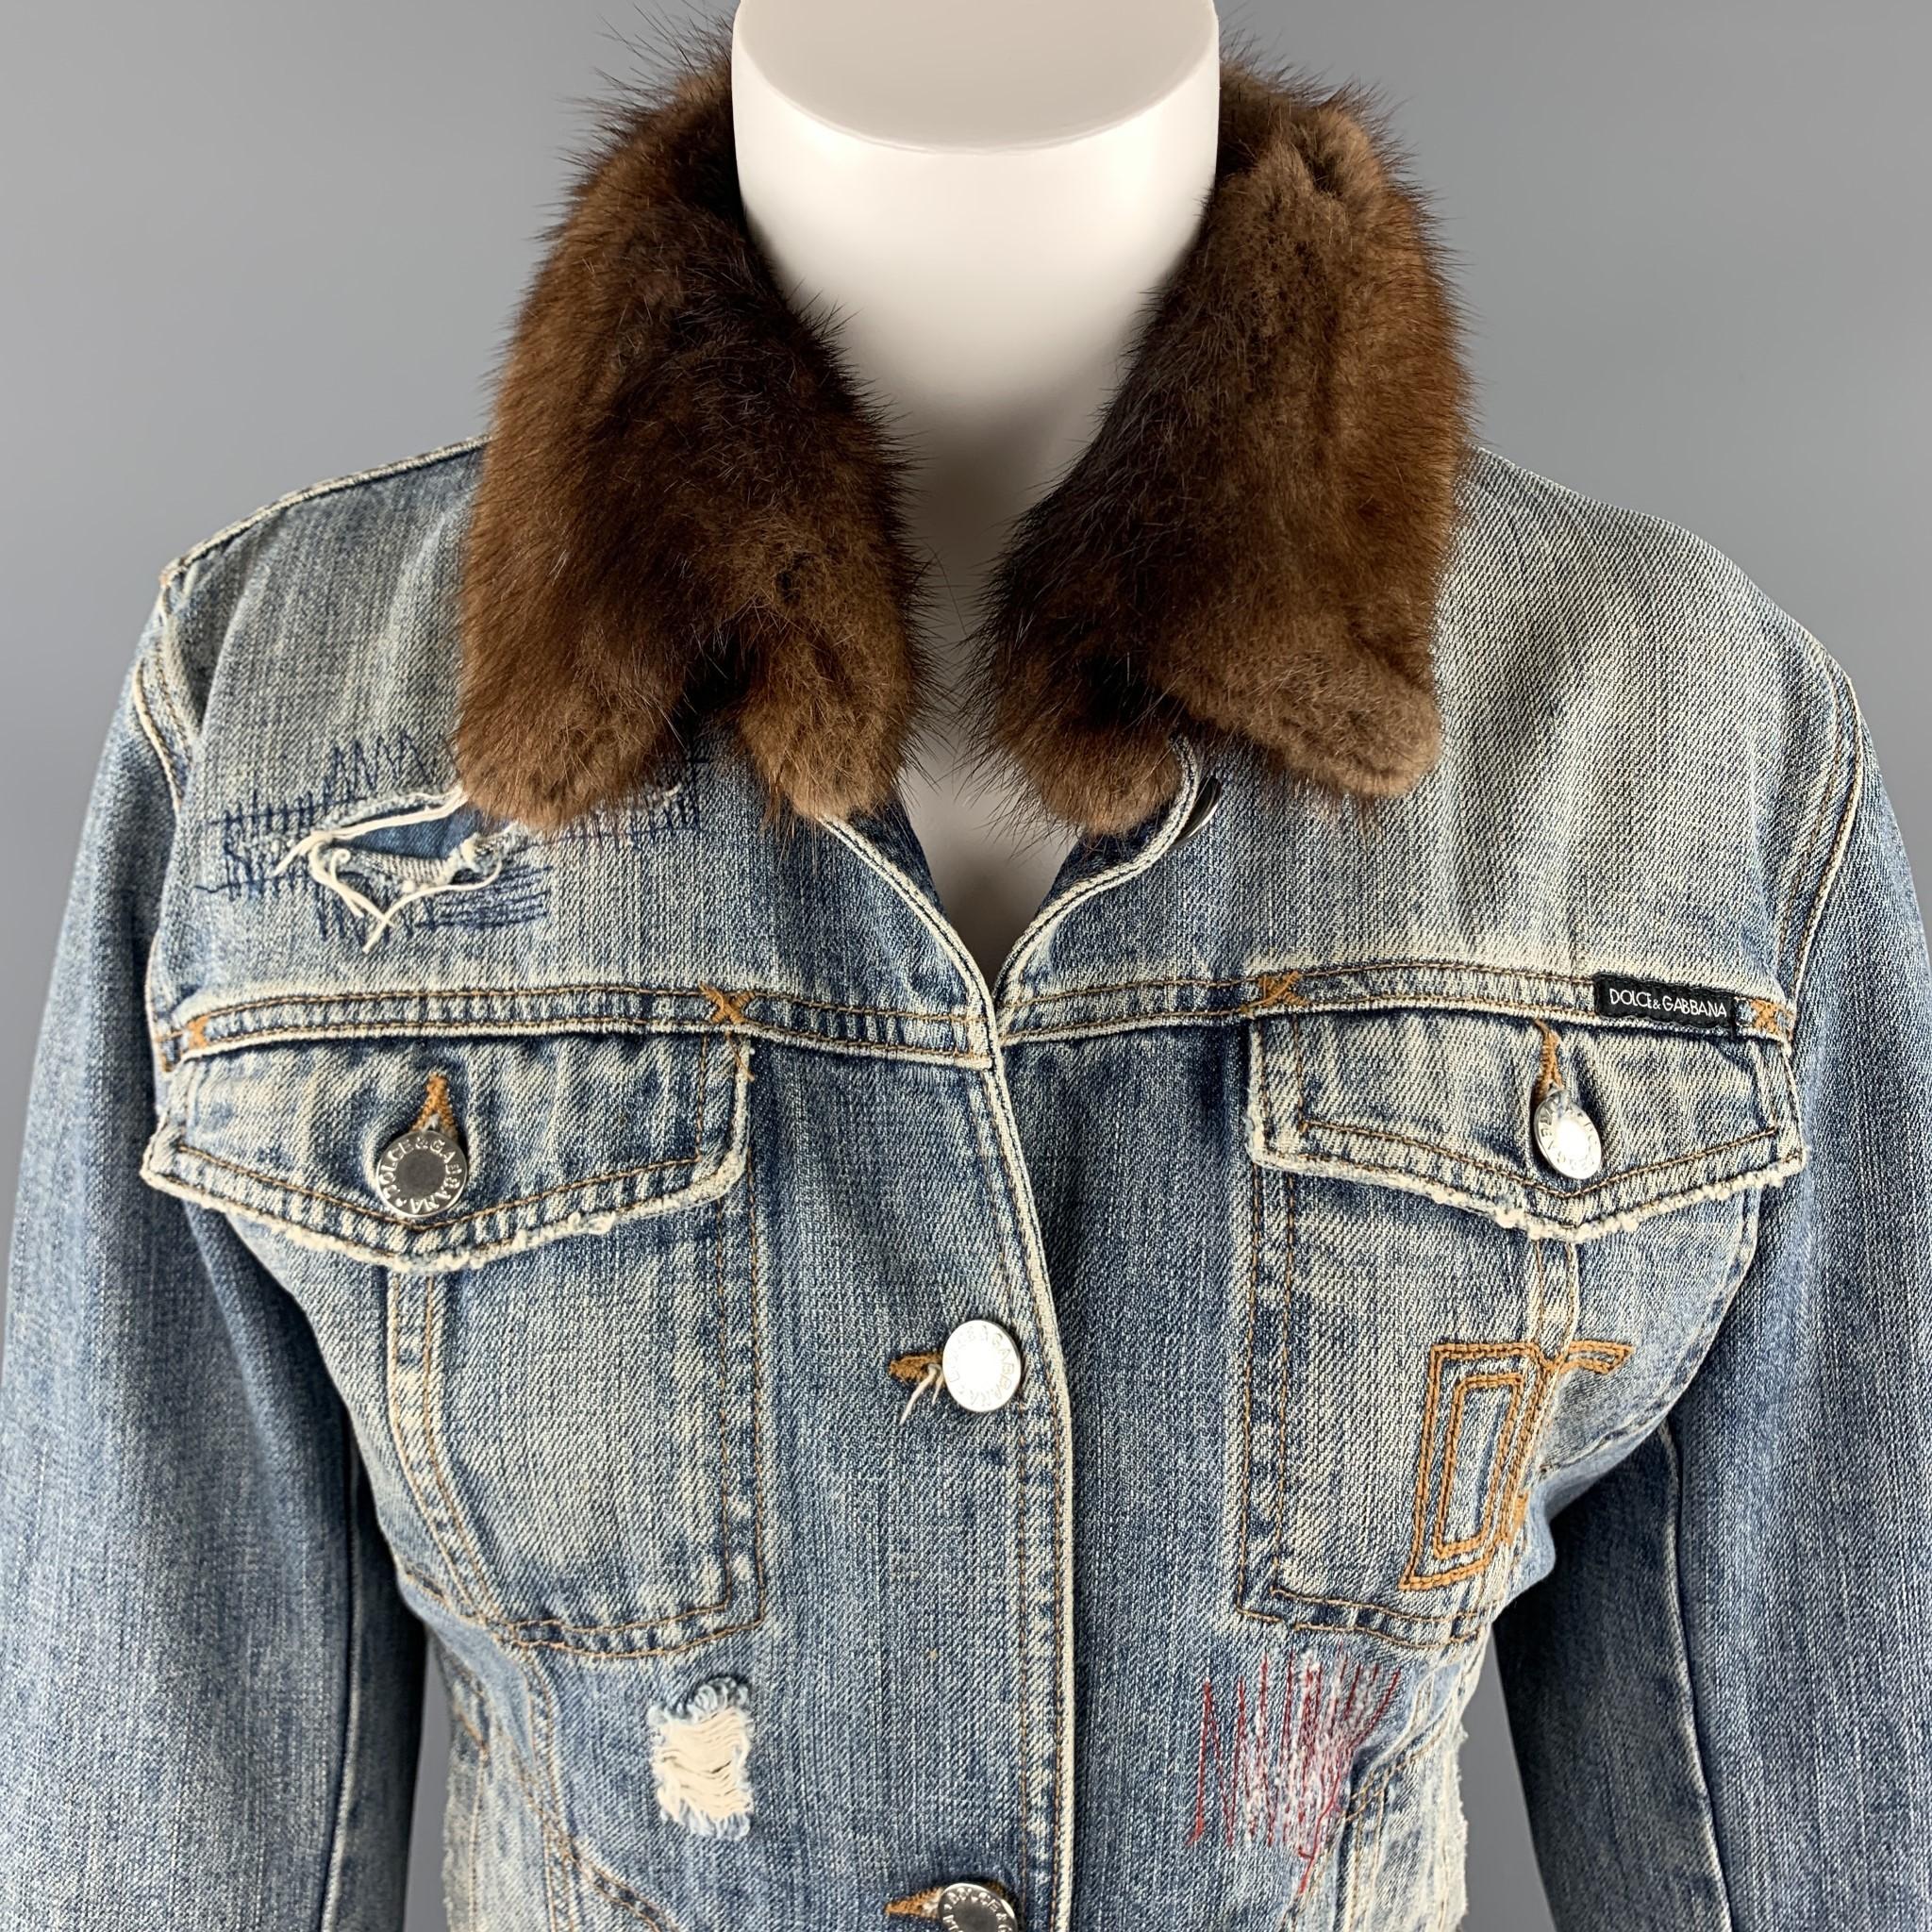 DOLCE & GABBANA trucker jacket comes in a light washed denim with distressing and stitch work throughout, silver tone hardware, and fur collar. Made in Italy.

Excellent Pre-Owned Condition.
Marked: IT 46

Measurements:

Shoulder: 17 in.
Bust: 40